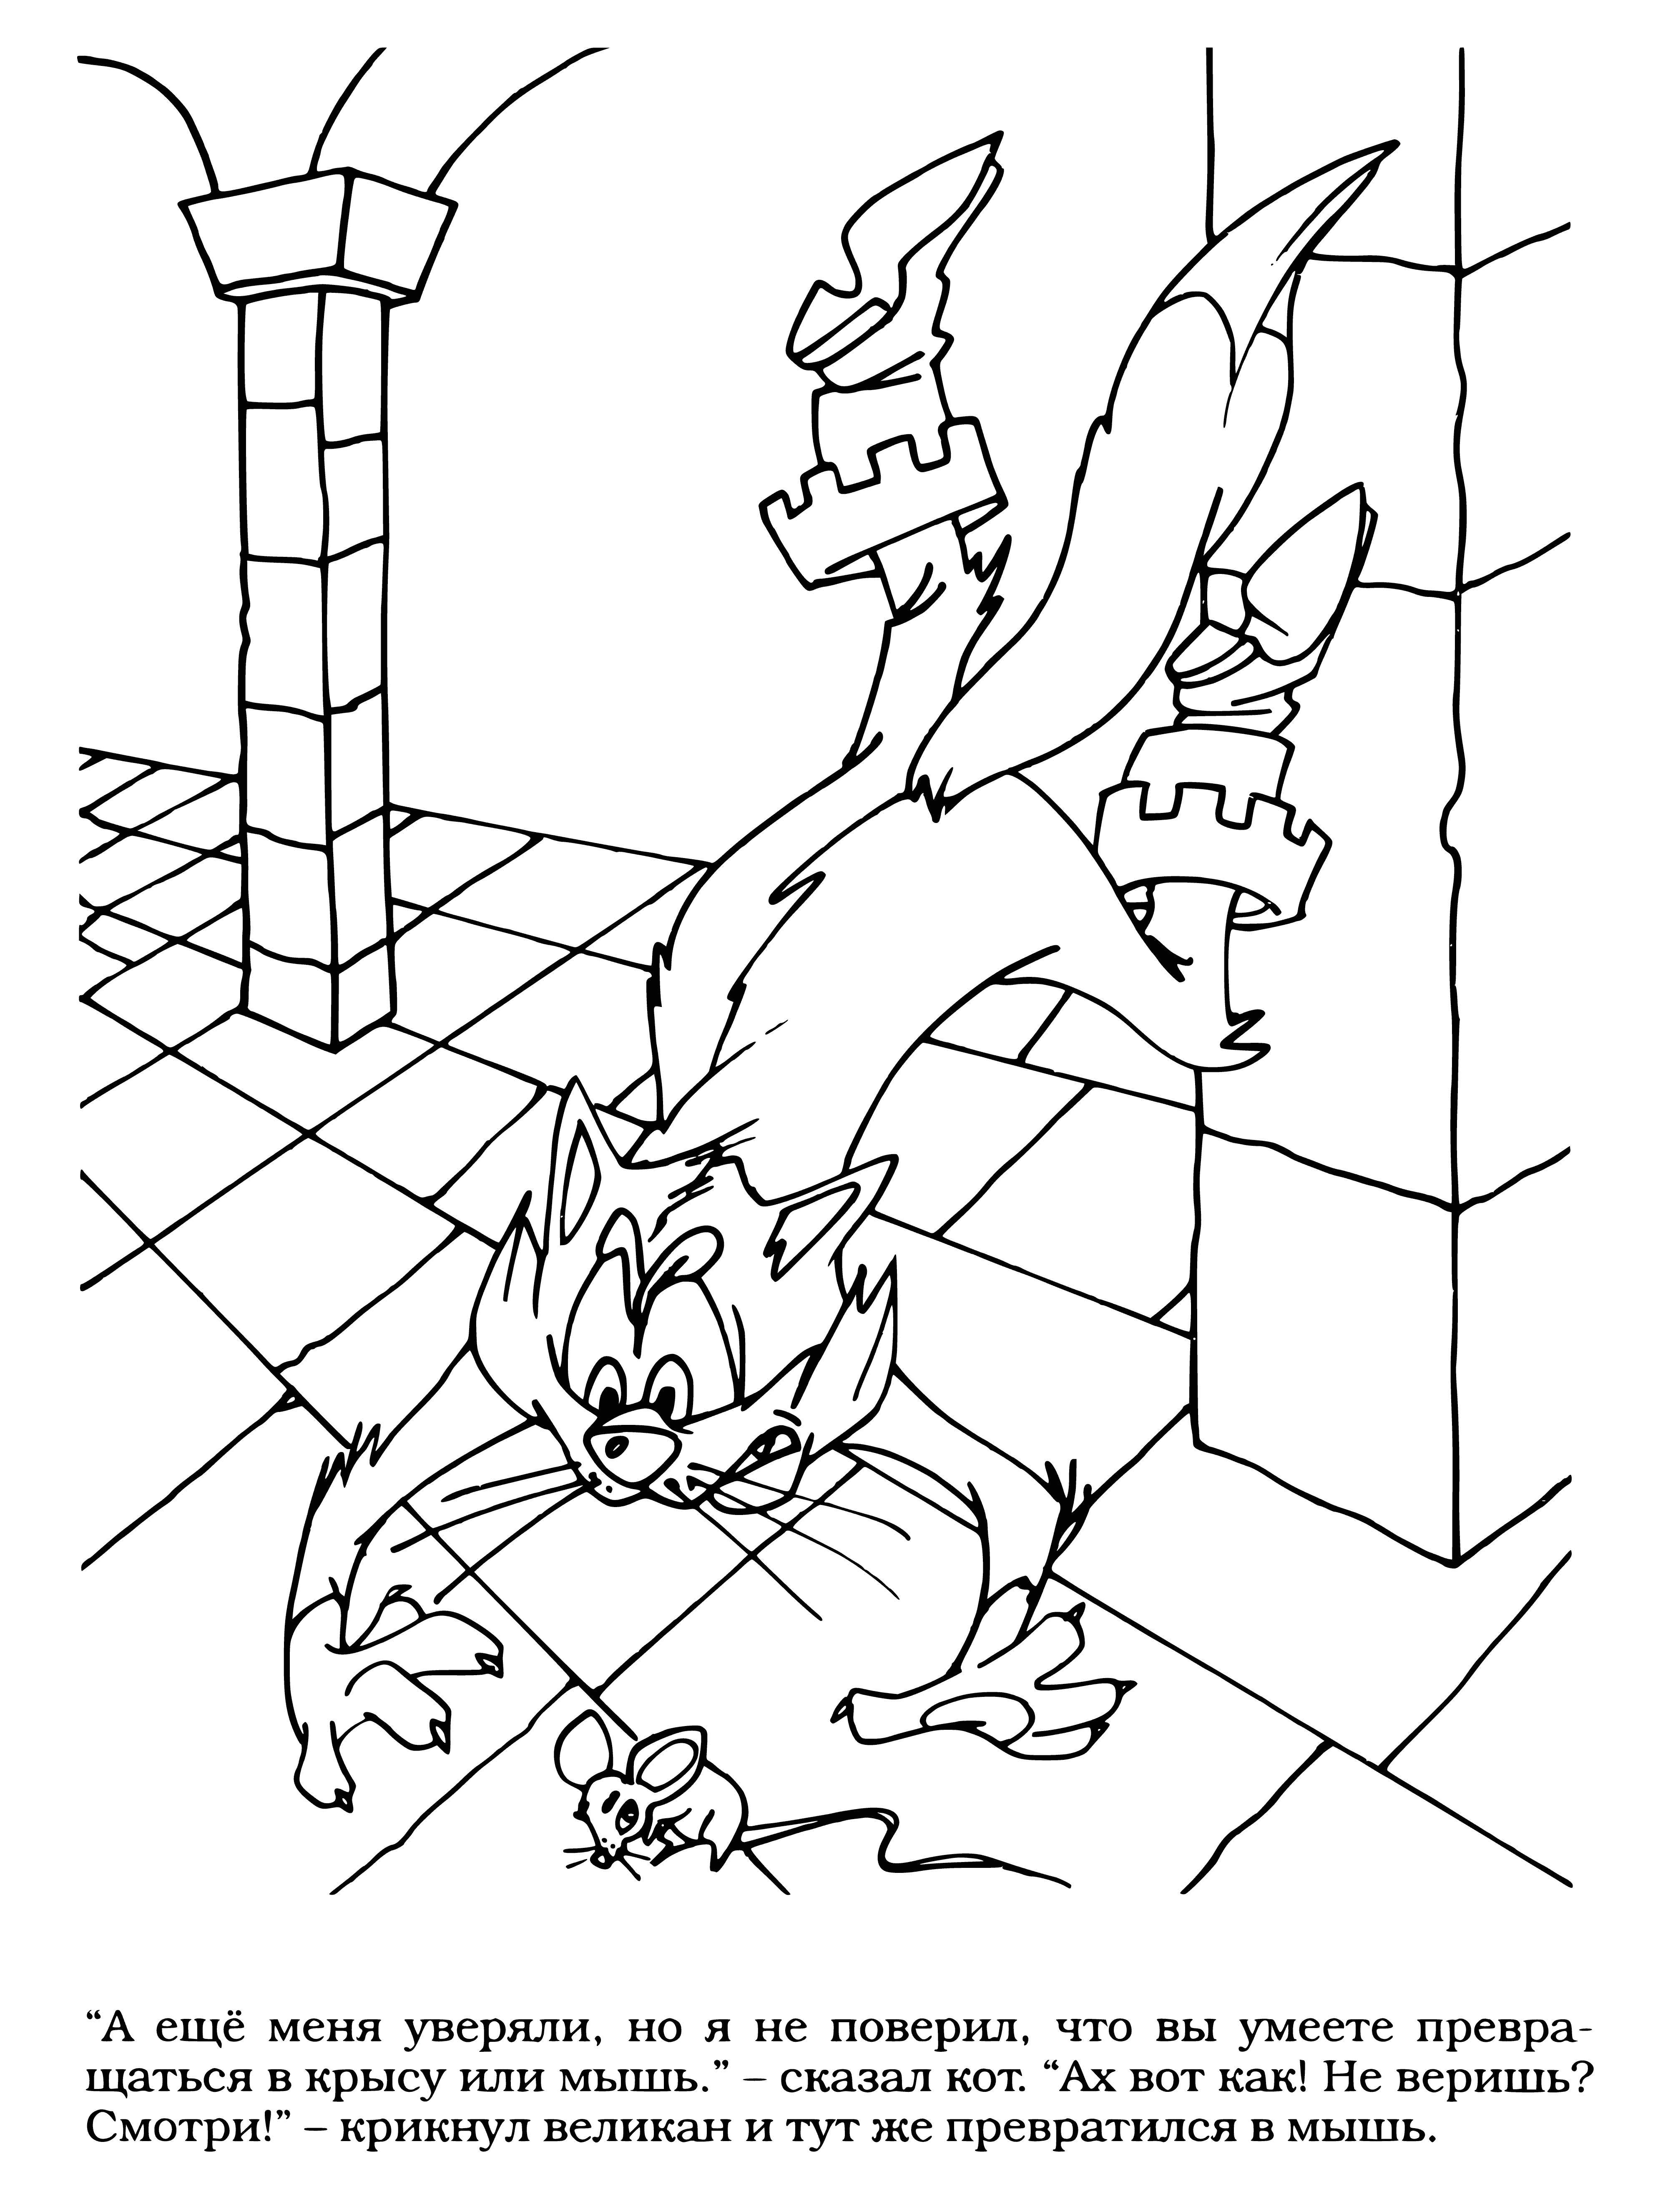 coloring page: A big mouse stands on two legs, wearing a blue coat and red scarf. Beady eyes, long thin tail, pointy ears. #ColoringPage